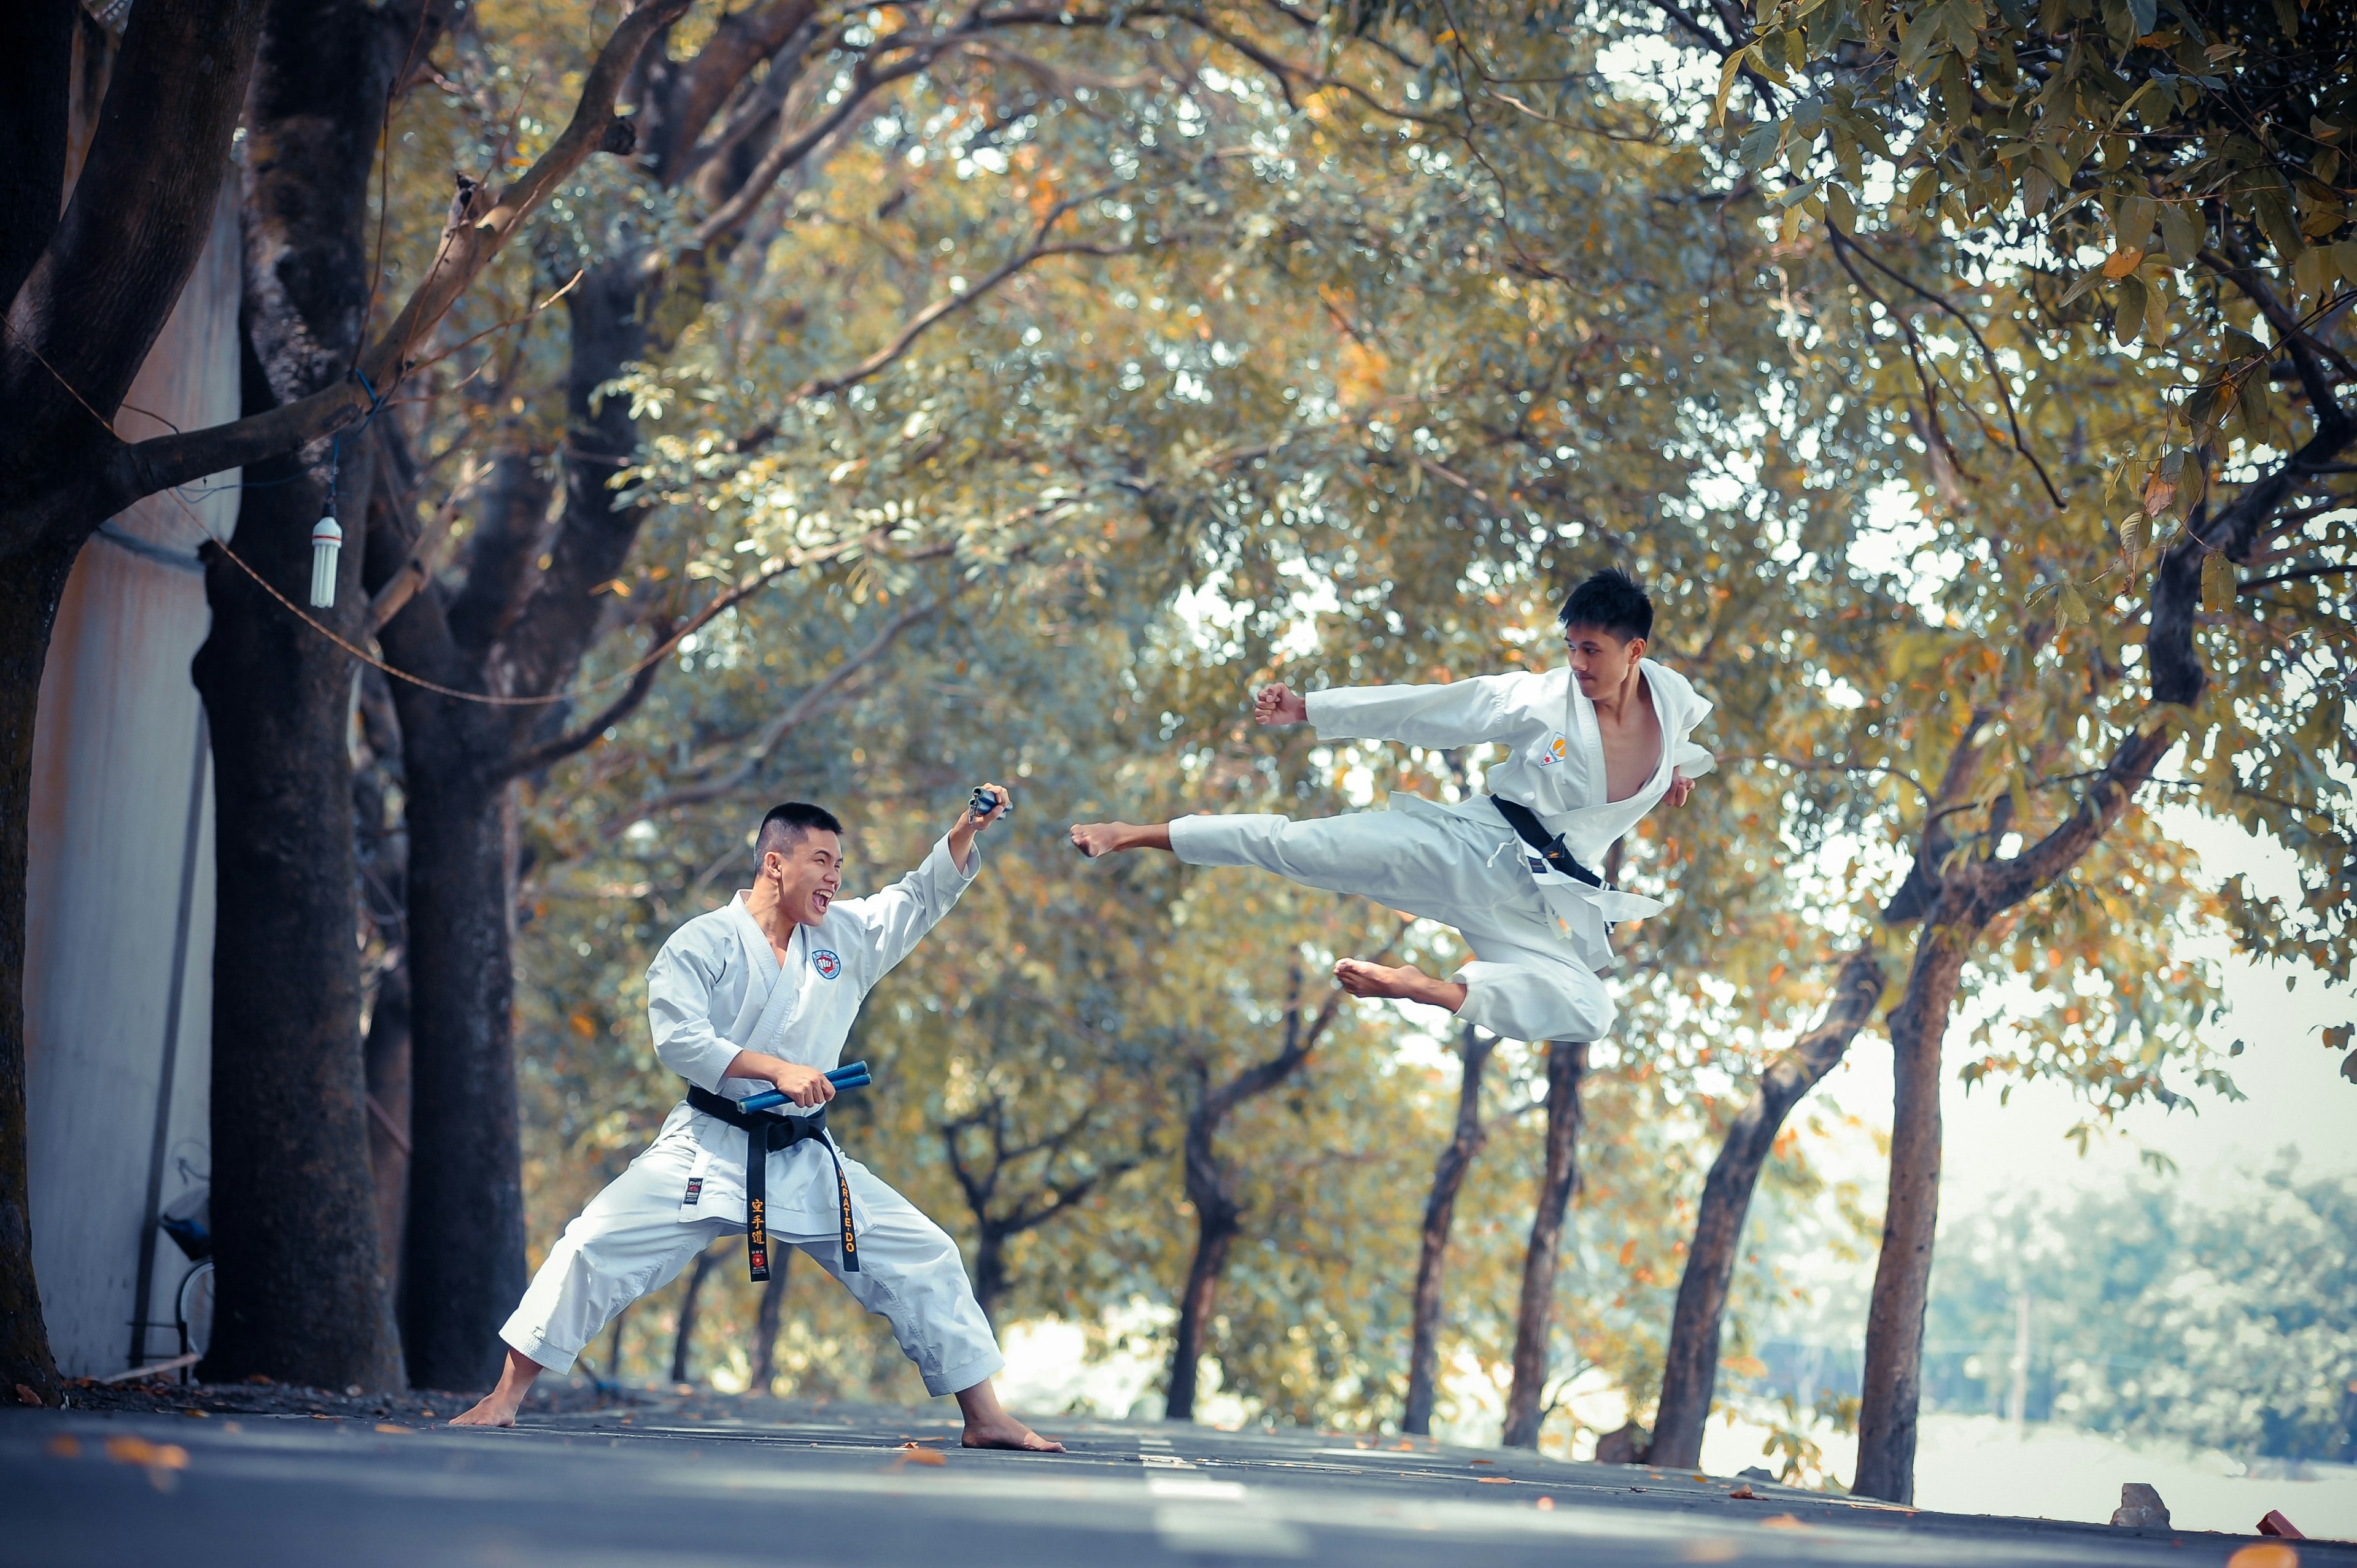 Two men performing martial arts. One is doing a flying kick towards the other.